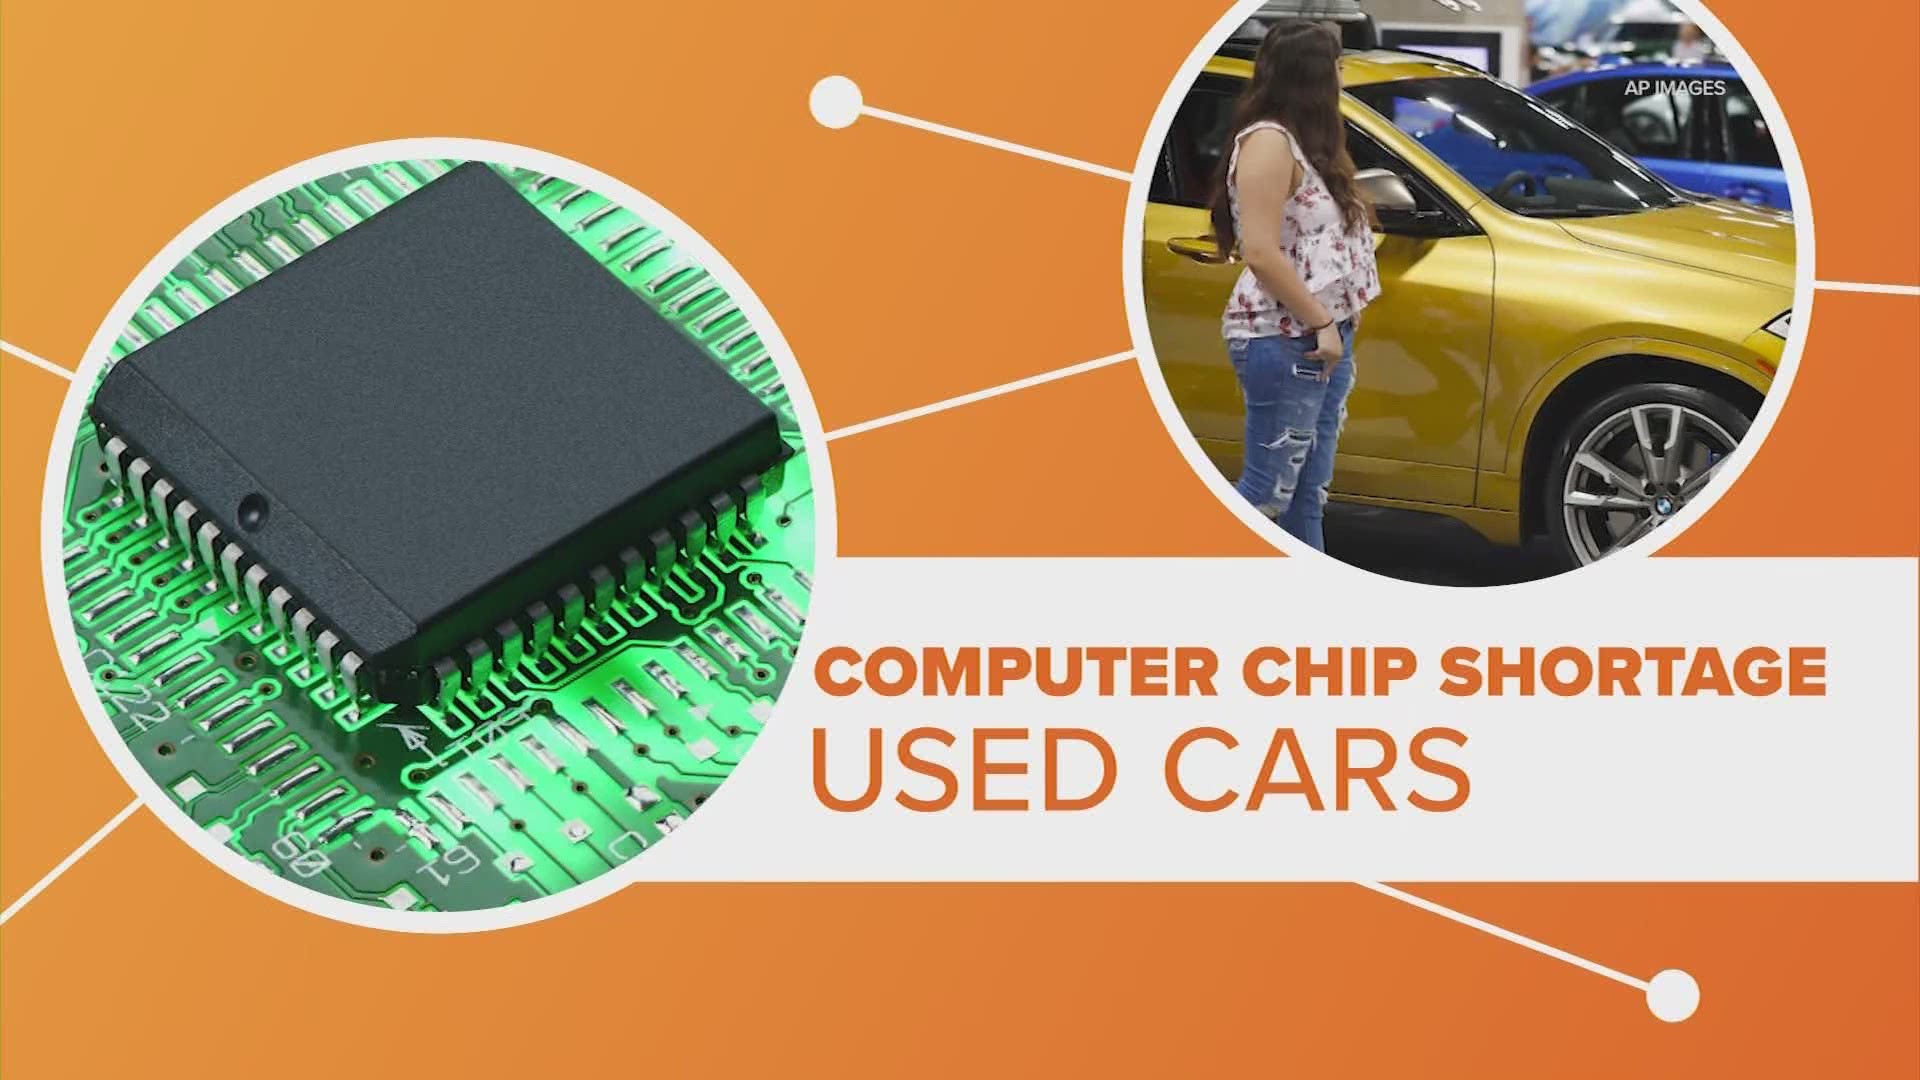 A shortage of computer chips means you could be paying higher prices for used cars.